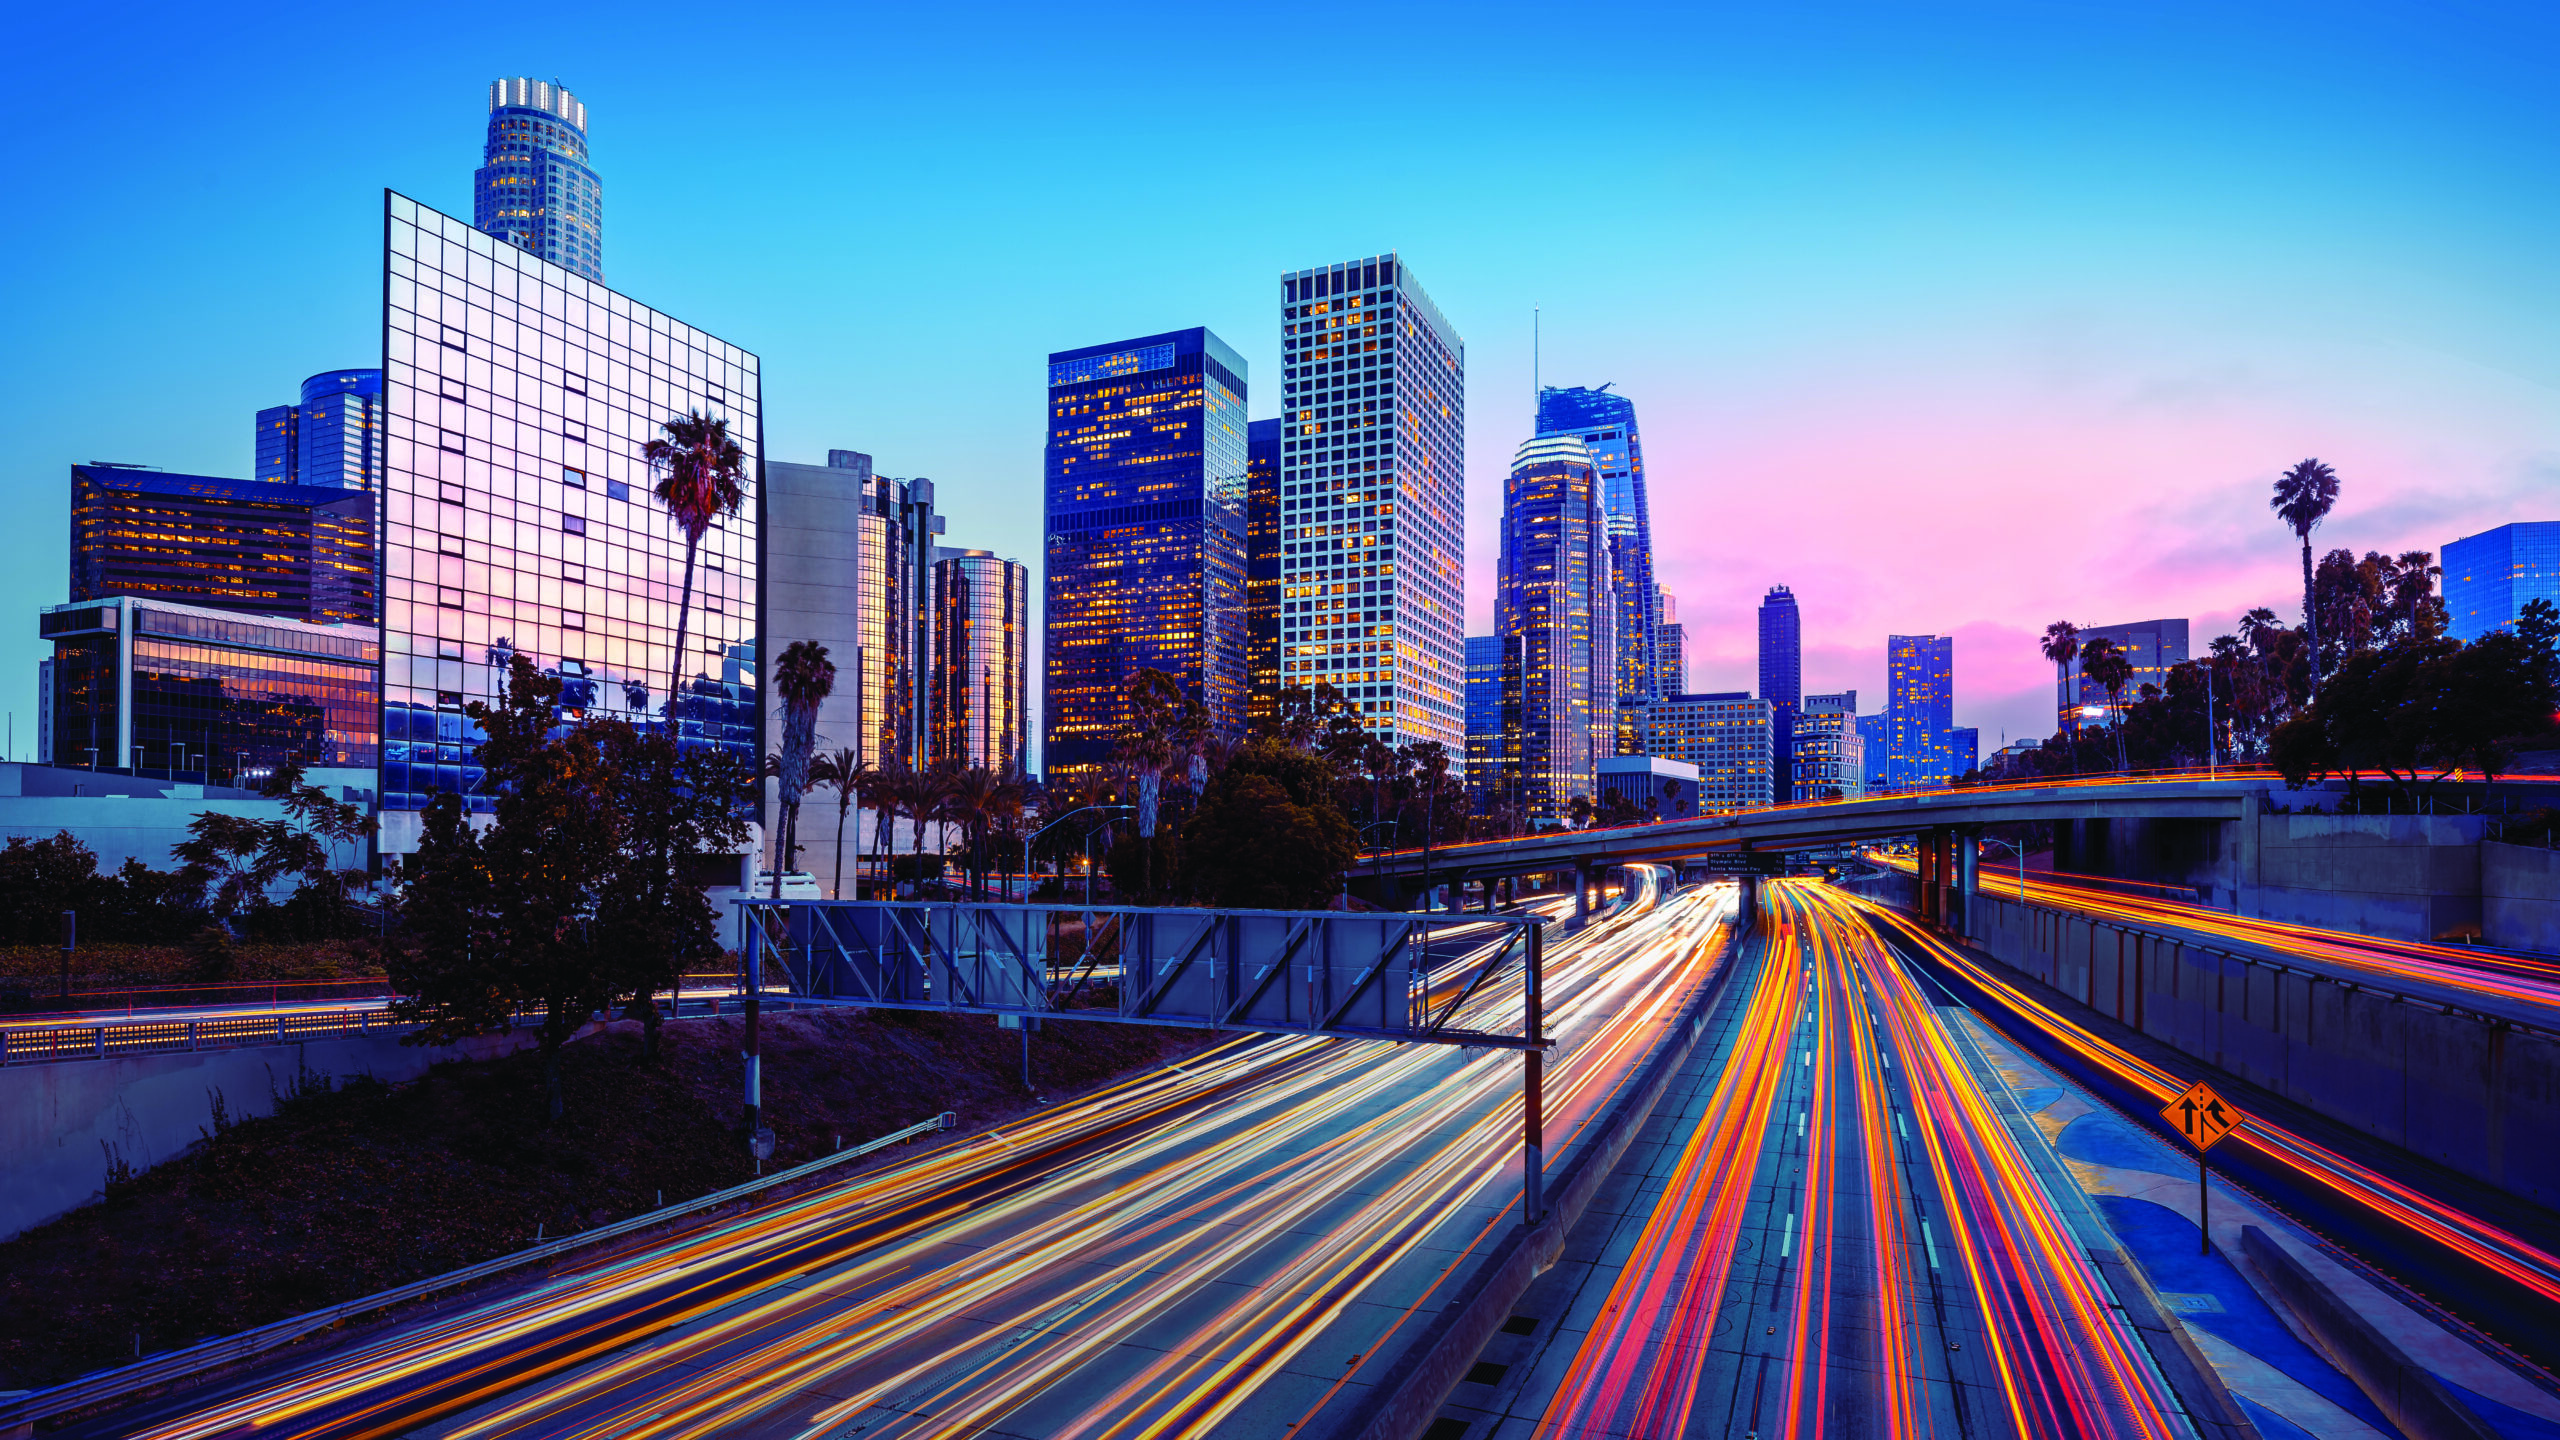 The skyline of Los Angeles during rush hour